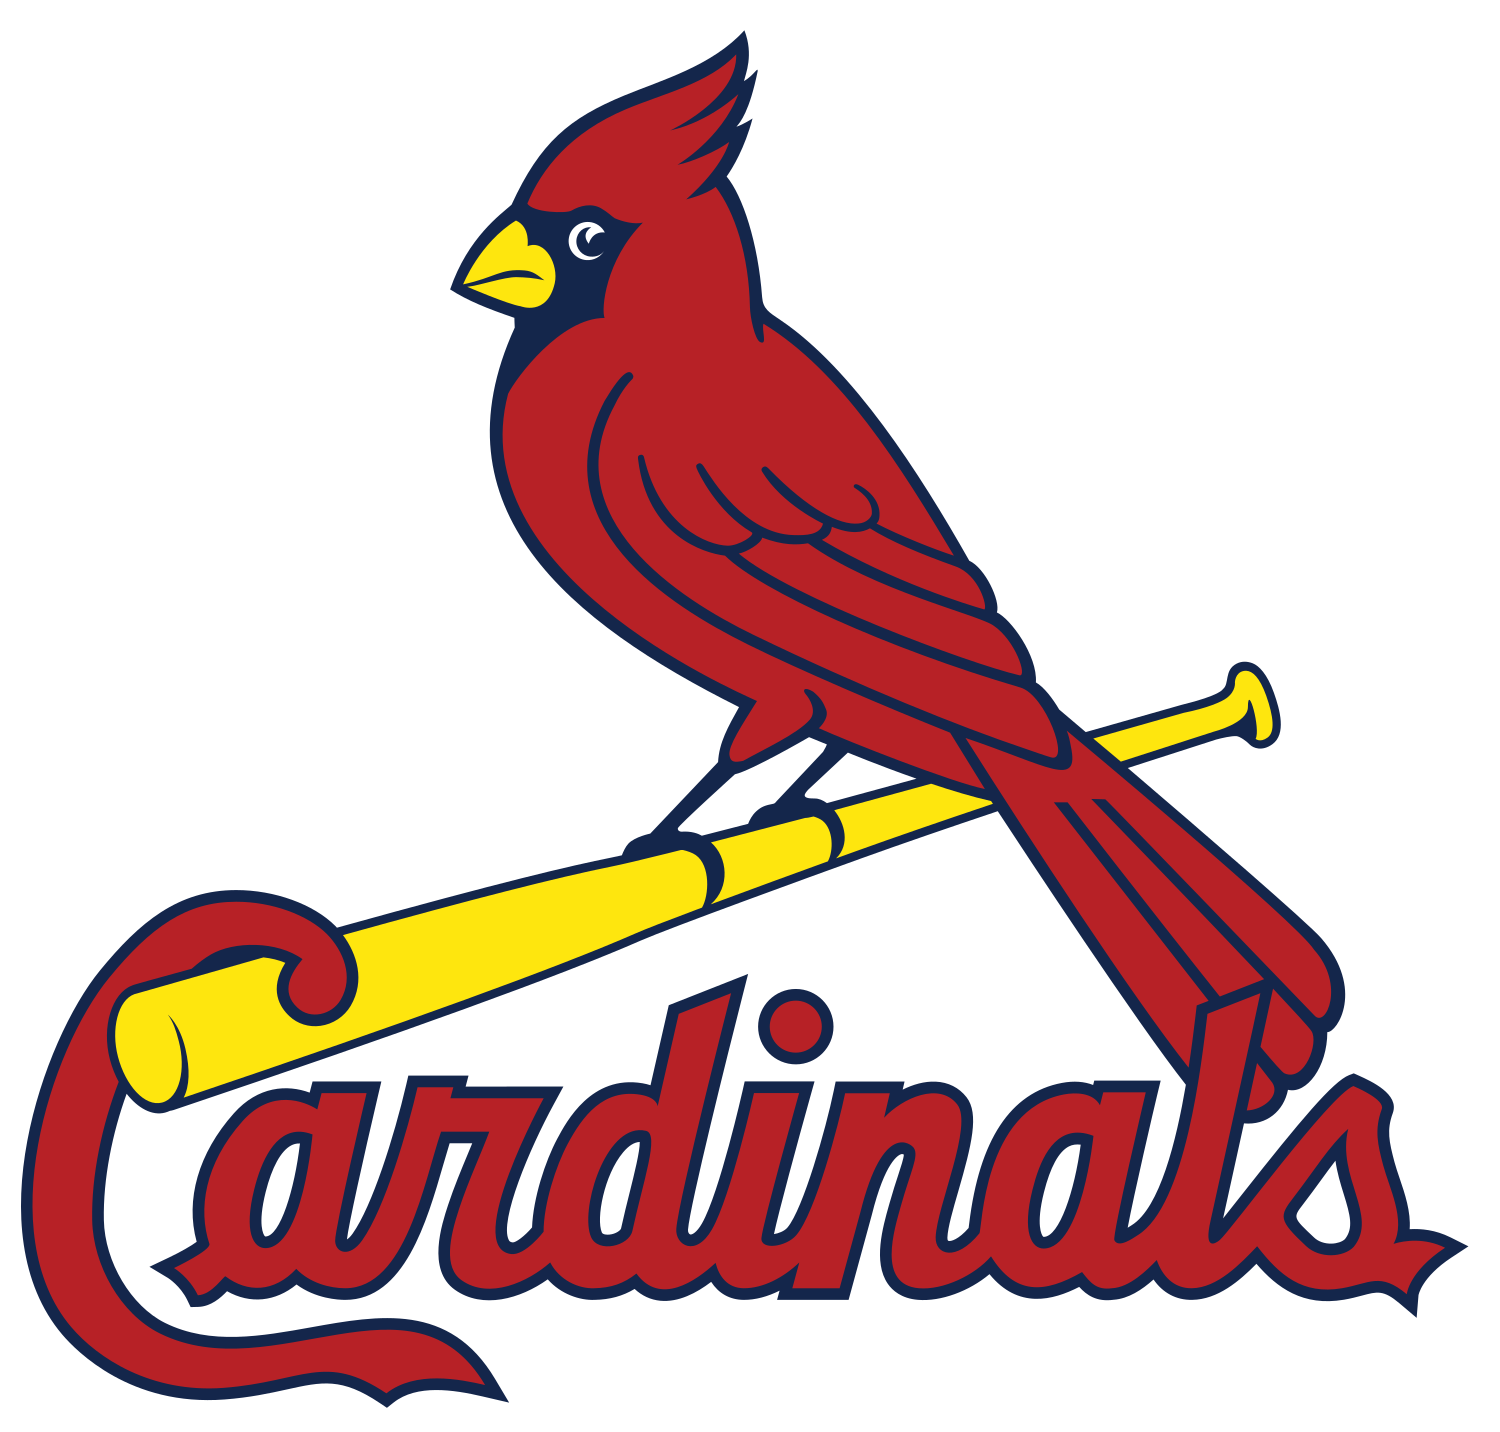 Cardinals, Cubs mascots visiting presidential museum on Dec. 16